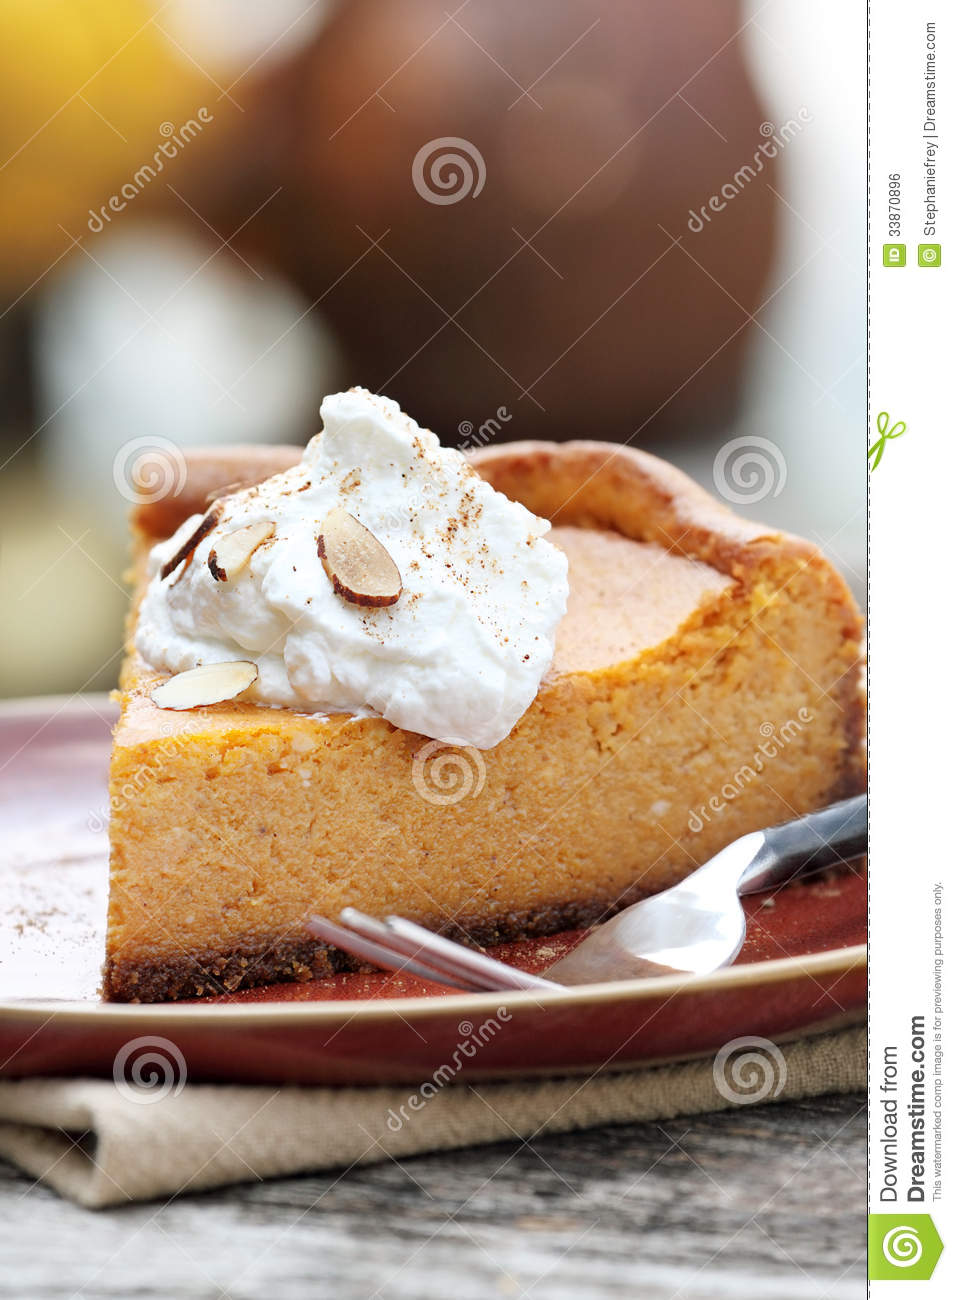 Pumpkin Cheesecake Pie With Whipped Cream Royalty Free Stock Image